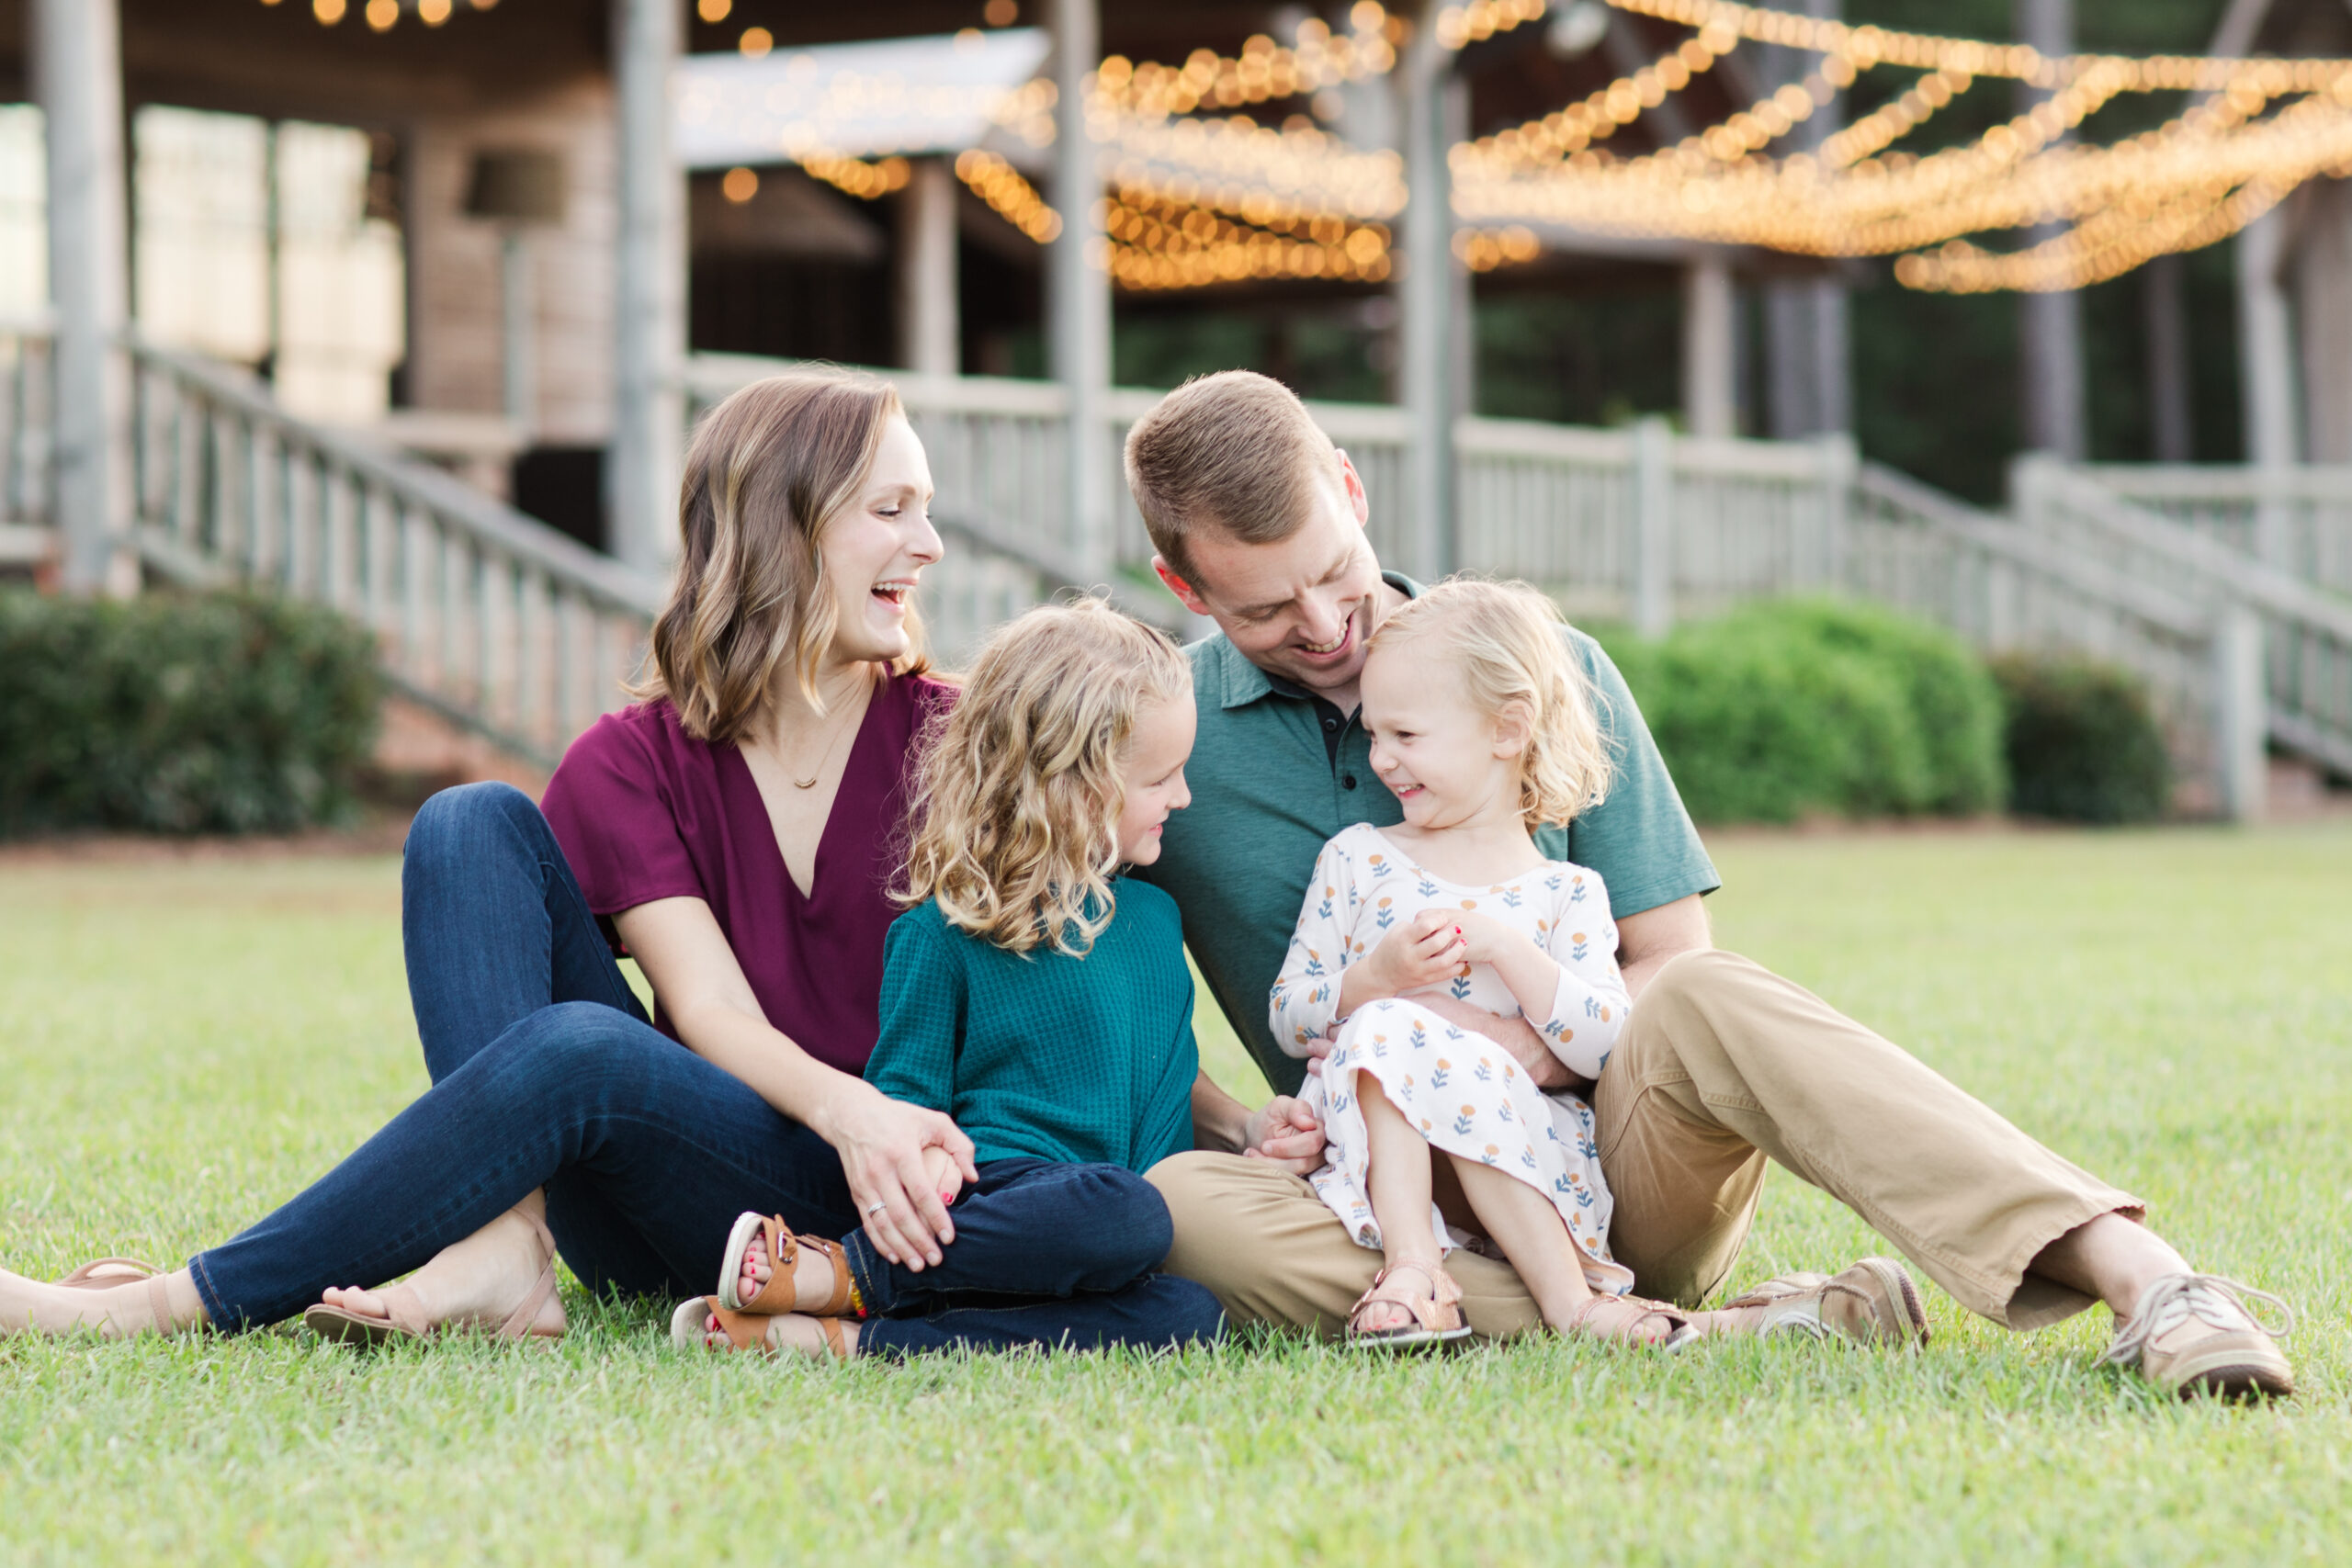 picking the perfect location for family photos involves thoughtful consideration of your family's personality, the season and weather, accessibility, and collaboration with your photographer